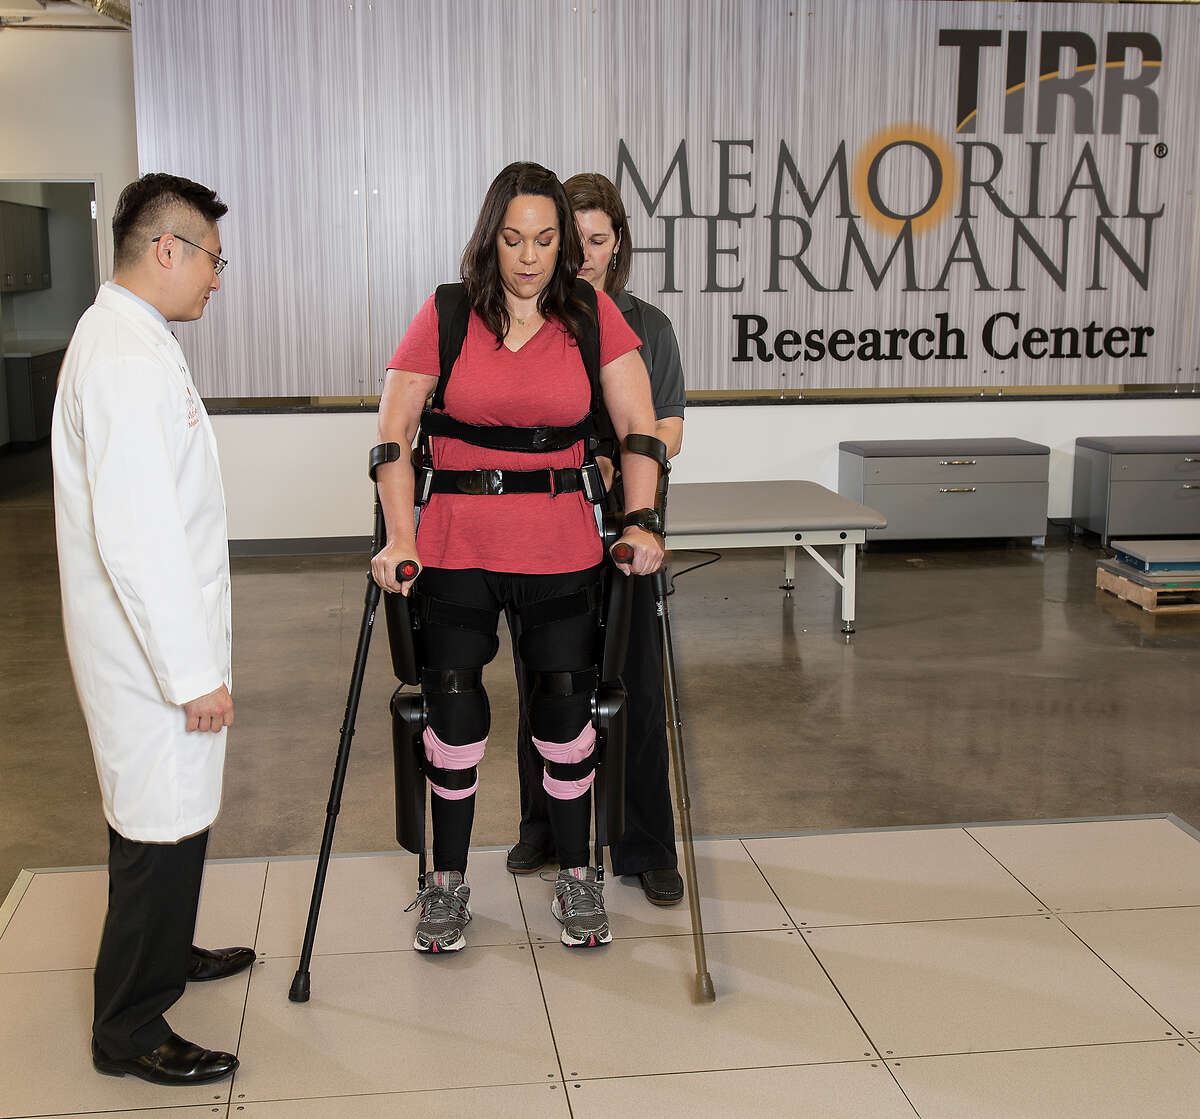 TIRR Memorial Hermann Hospital holds the No. 2 spot for the third consecutive year as one of the country's top rehabilitation hospitals according to U.S. News & World Report's Best Hospital rankings for 2017-18